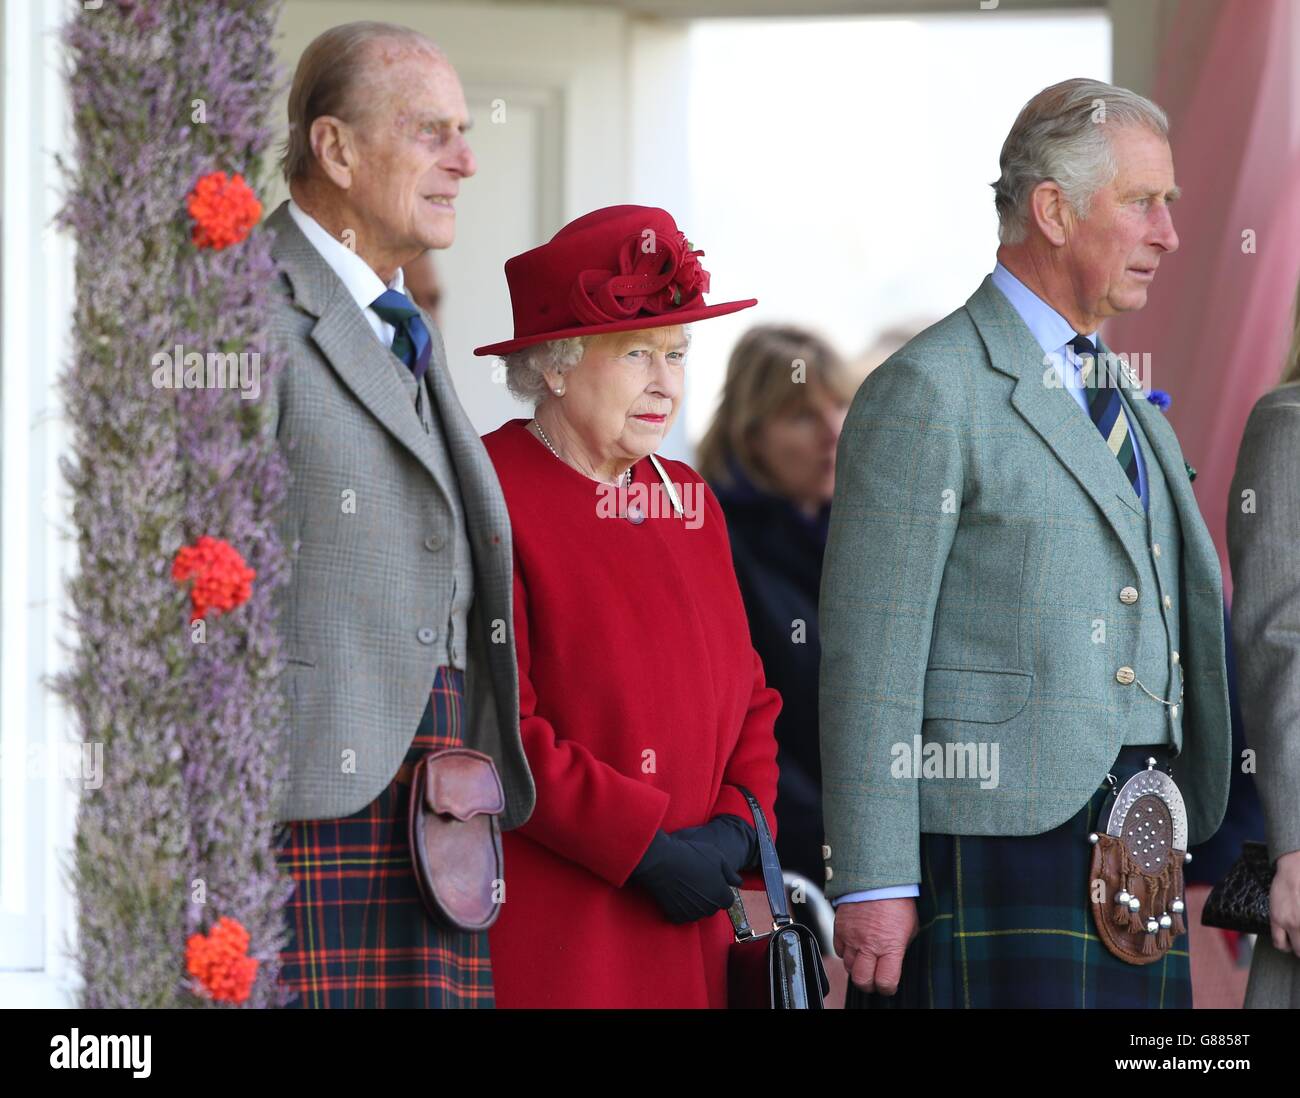 The Duke of Edinburgh, The Games' patron Queen Elizabeth II and the Prince of Wales, known as the Duke of Rothesay when in Scotland during the Braemar Royal Highland Gathering held a short distance from the royals' summer retreat at the Balmoral estate in Aberdeenshire. Stock Photo